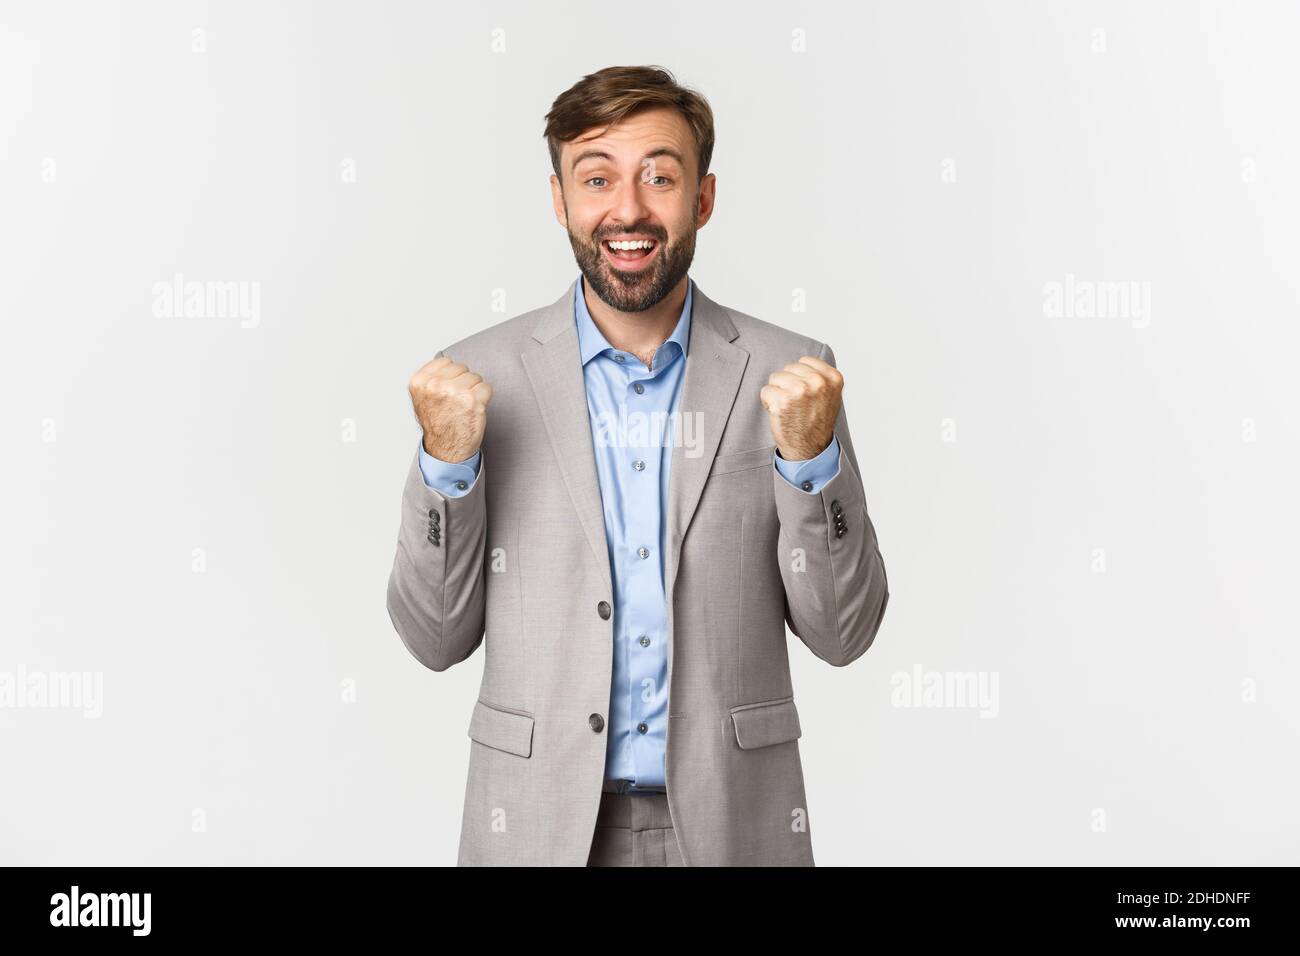 Portrait of relieved and happy businessman with beard, wearing grey suit, achieve goal, clenching fists like a winner, triumphin Stock Photo